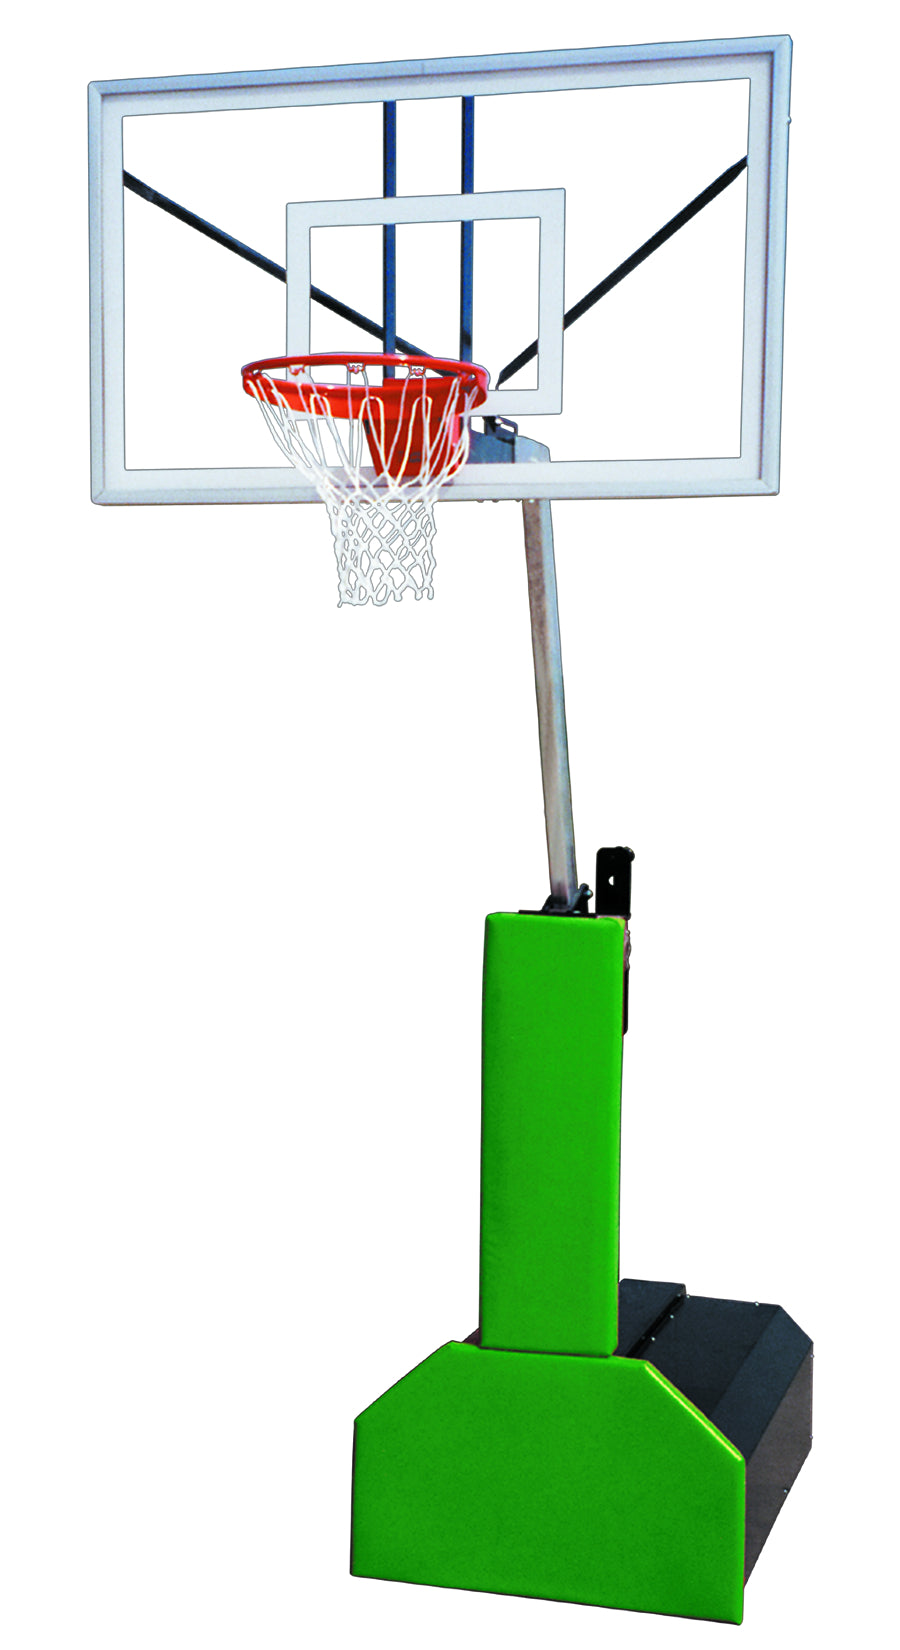 First Team Thunder Pro Portable Basketball Goal - 36"x60" Tempered Glass